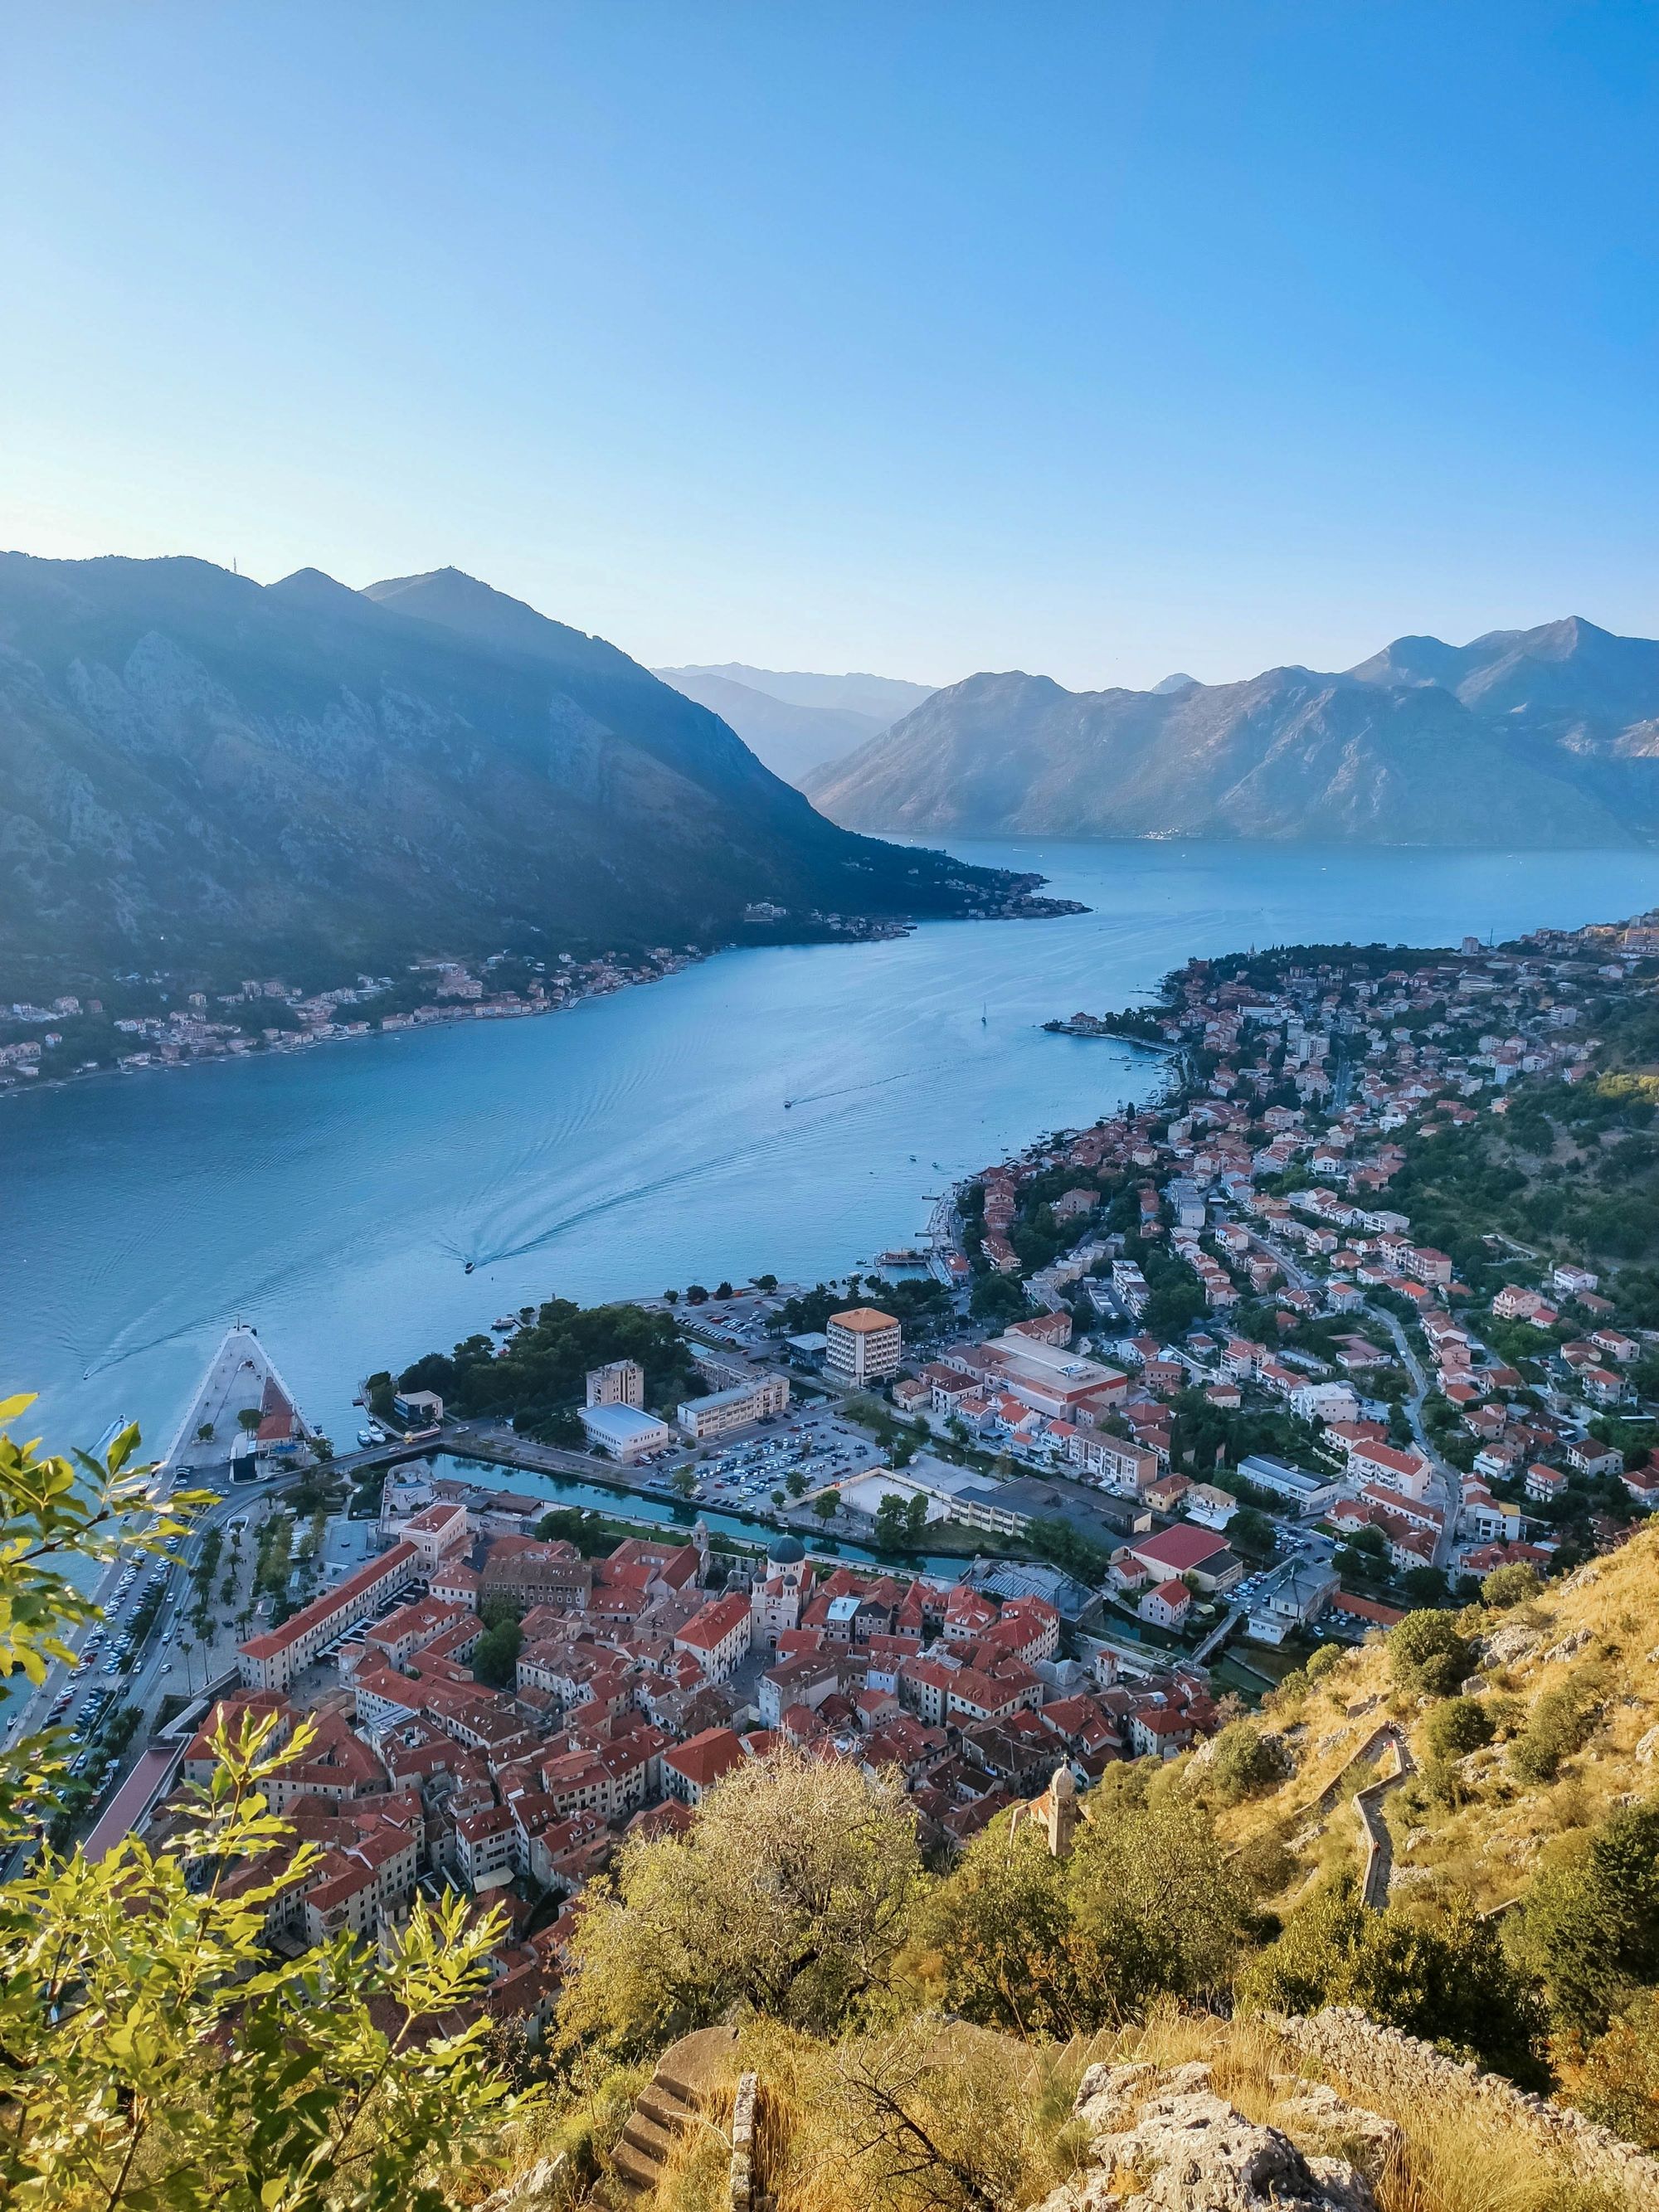 From the top of the Bay of Kotor looking down into the fjord and mountains